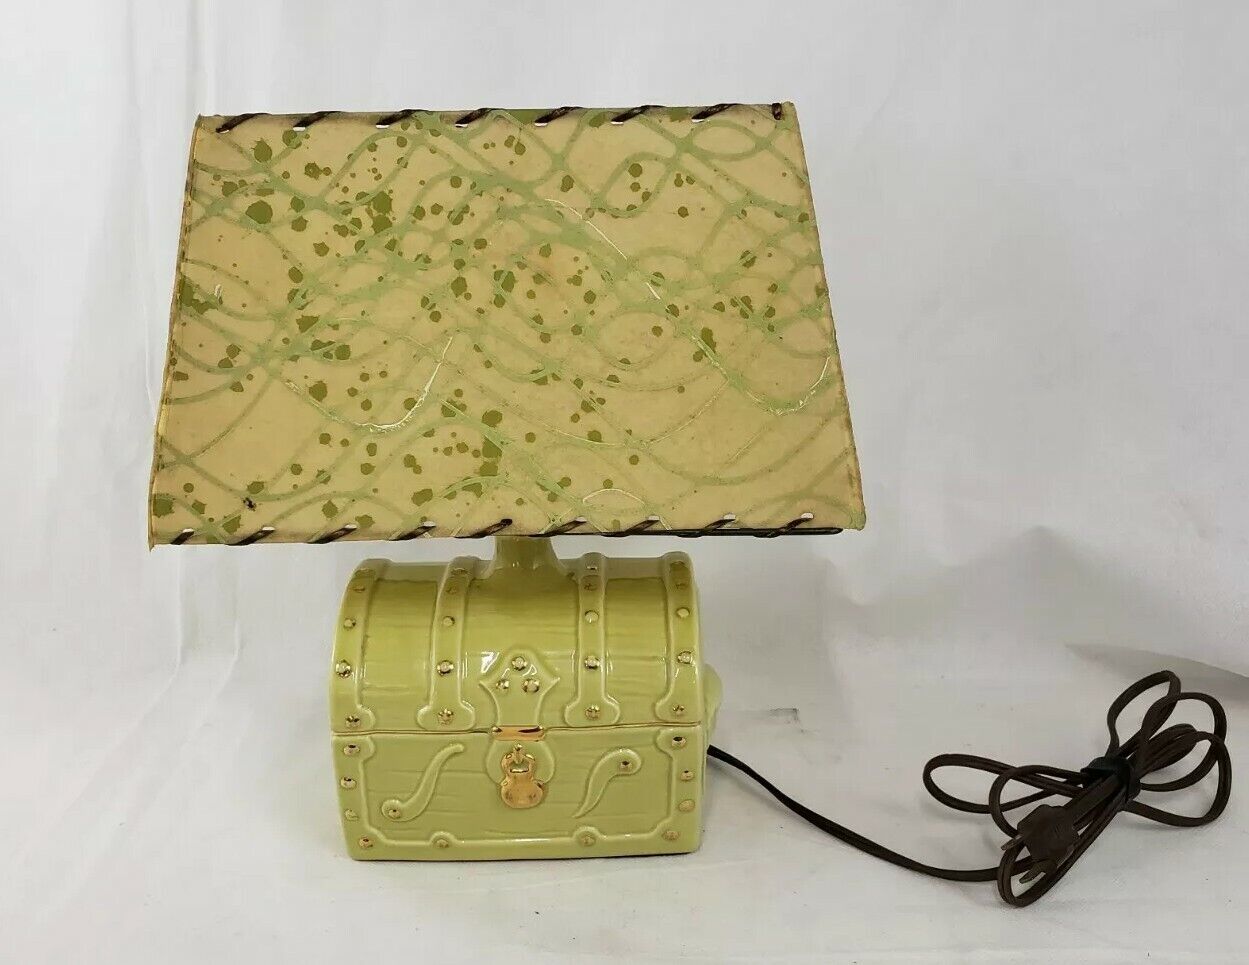 1940s Ceramic Chartreuse Green Treasure Chest Lamp with Fiberglass Shade WORKS